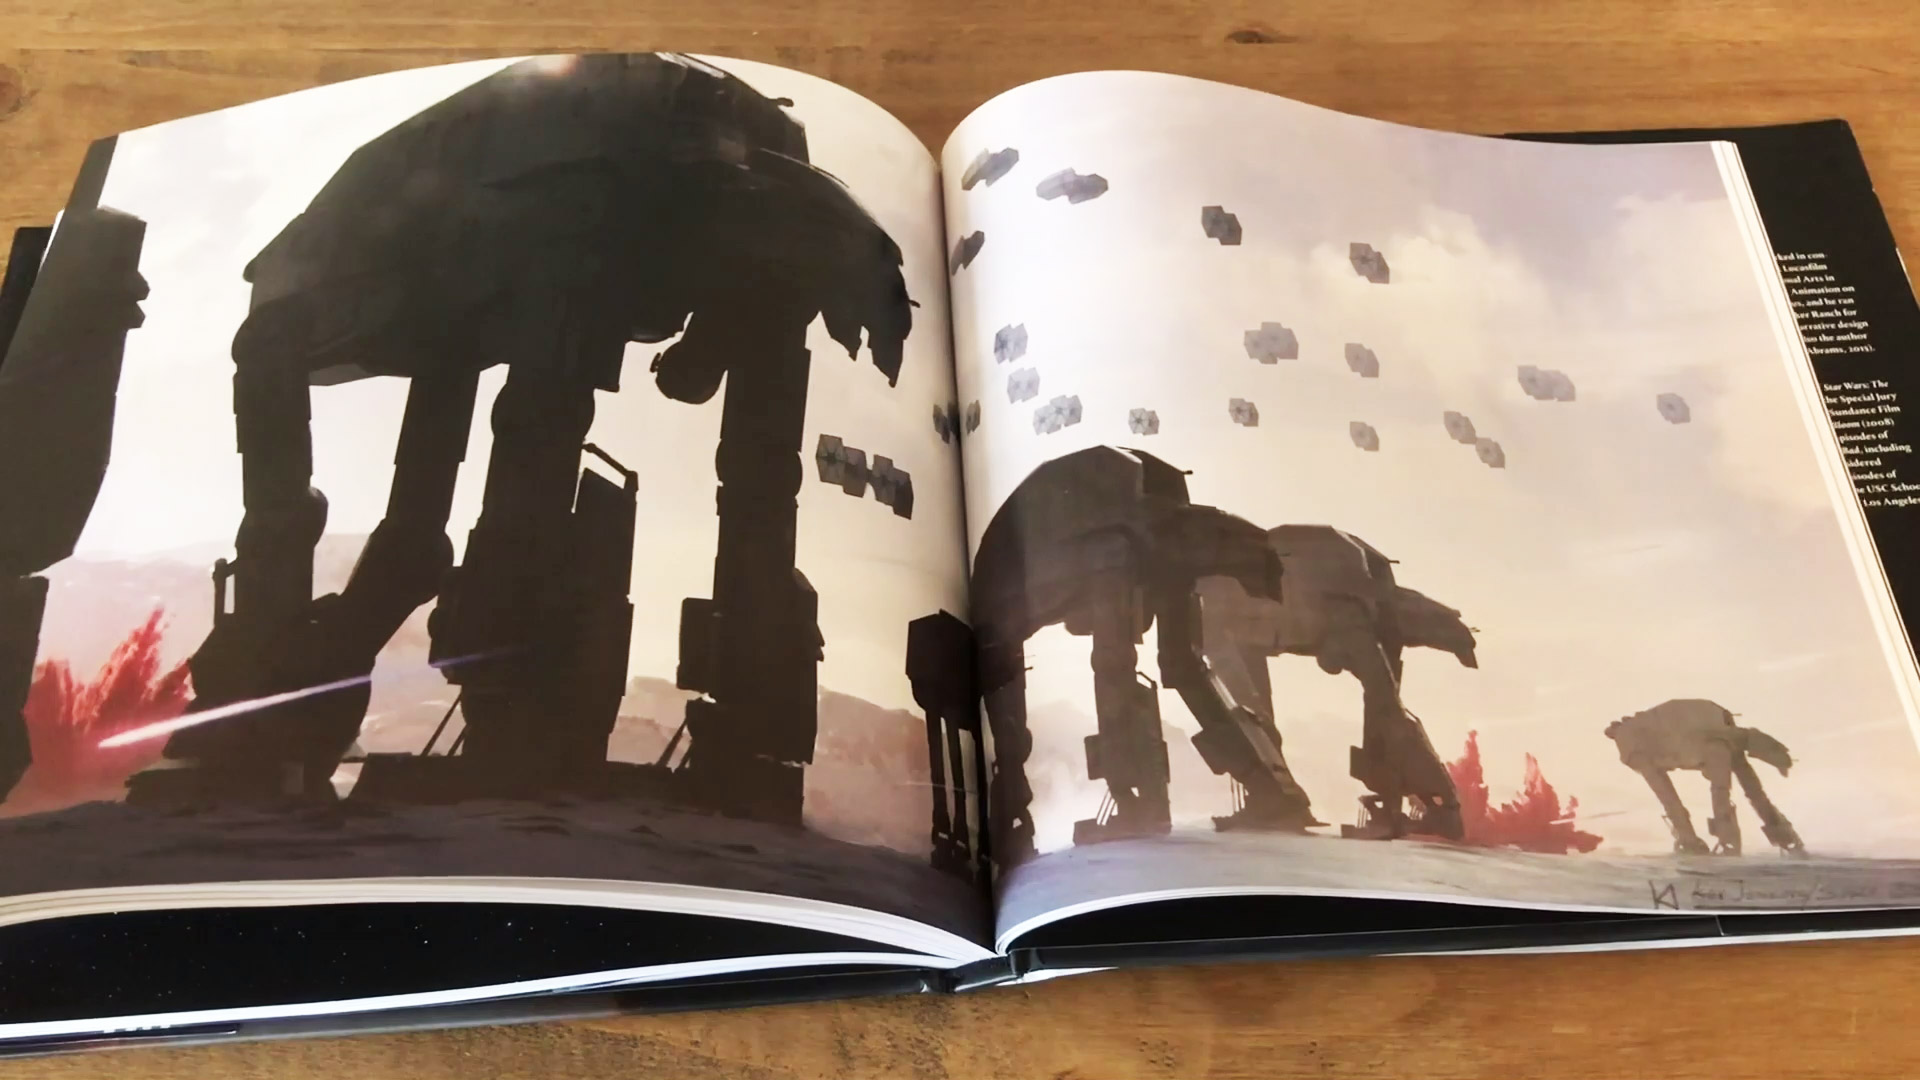 The Art Of Star Wars : The Last Jedi Book Review - Halcyon Realms